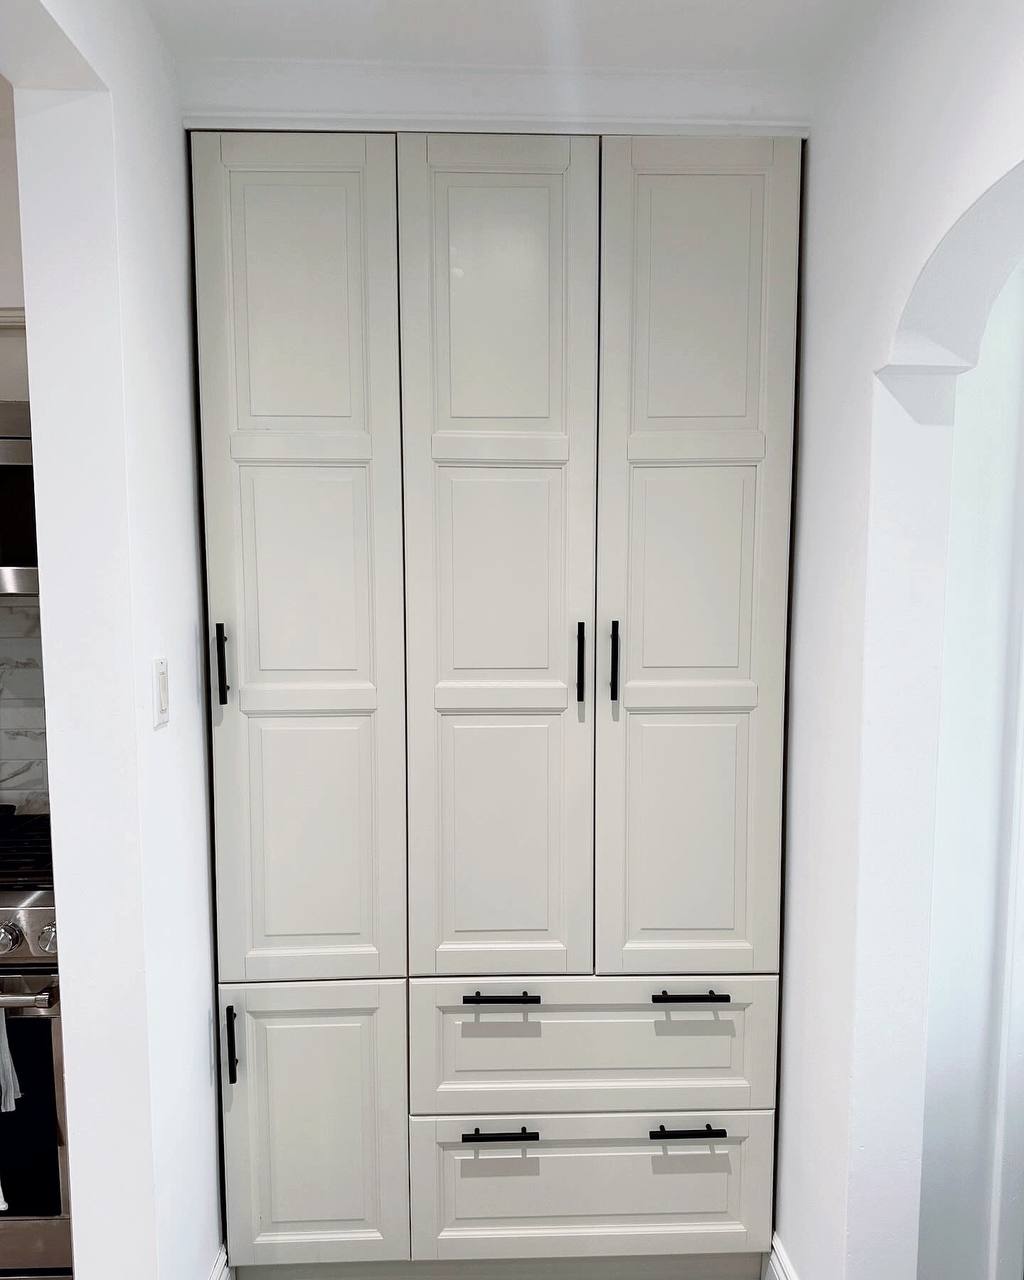 "After image of MDF pantry cabinet painted with Benjamin Moore Misty Air OC-44, creating a refreshed and inviting atmosphere in the George Town kitchen space